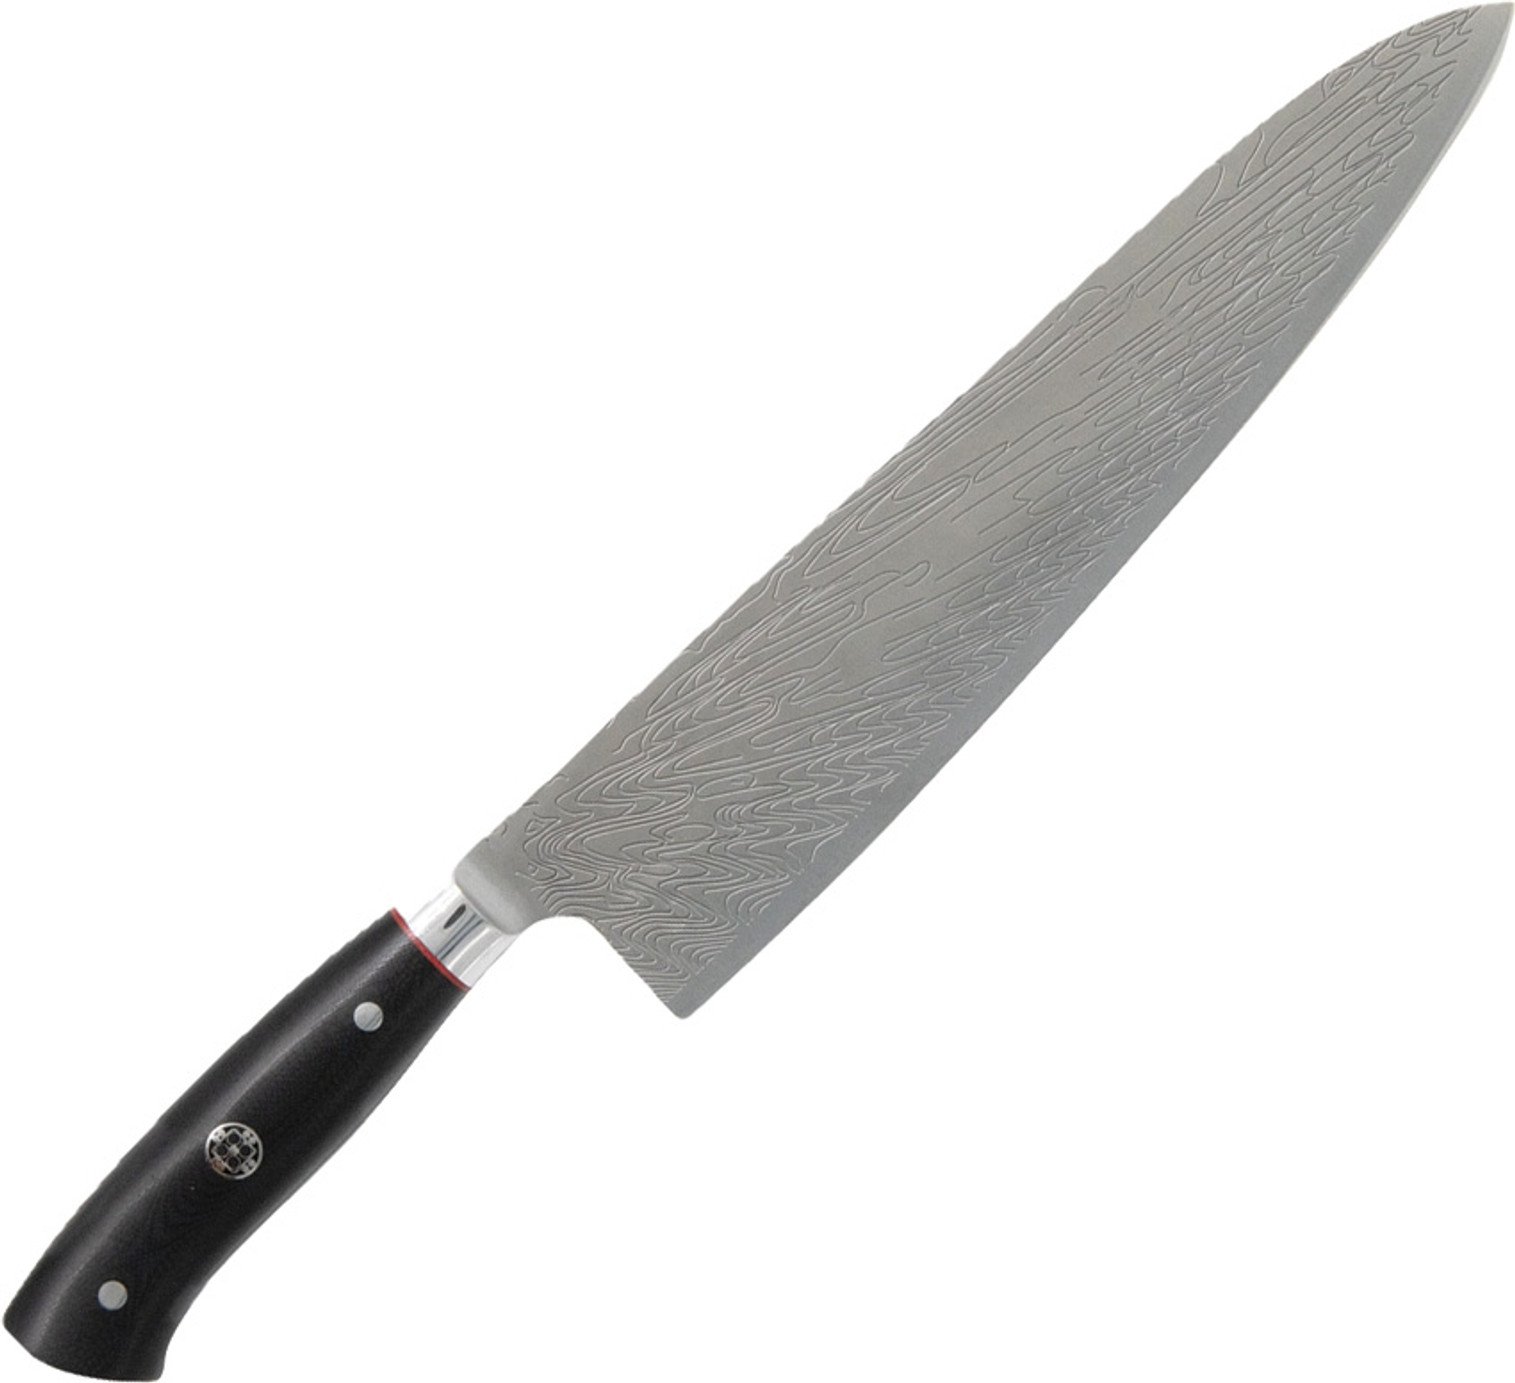 Dragon Storm Chefs Knife 9in